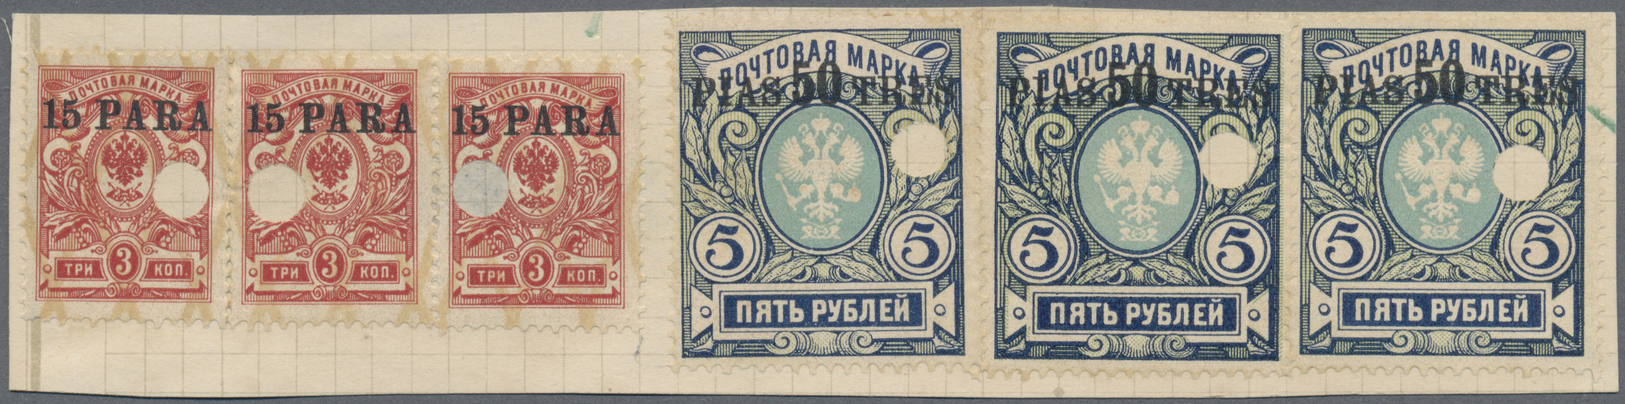 Brrst Russische Post In Der Levante - Staatspost: 1913, 3 Stamps 15 Pa. On 3 Kop. And 3 Items 50 Pia. On 5 R. Unused - Turkish Empire